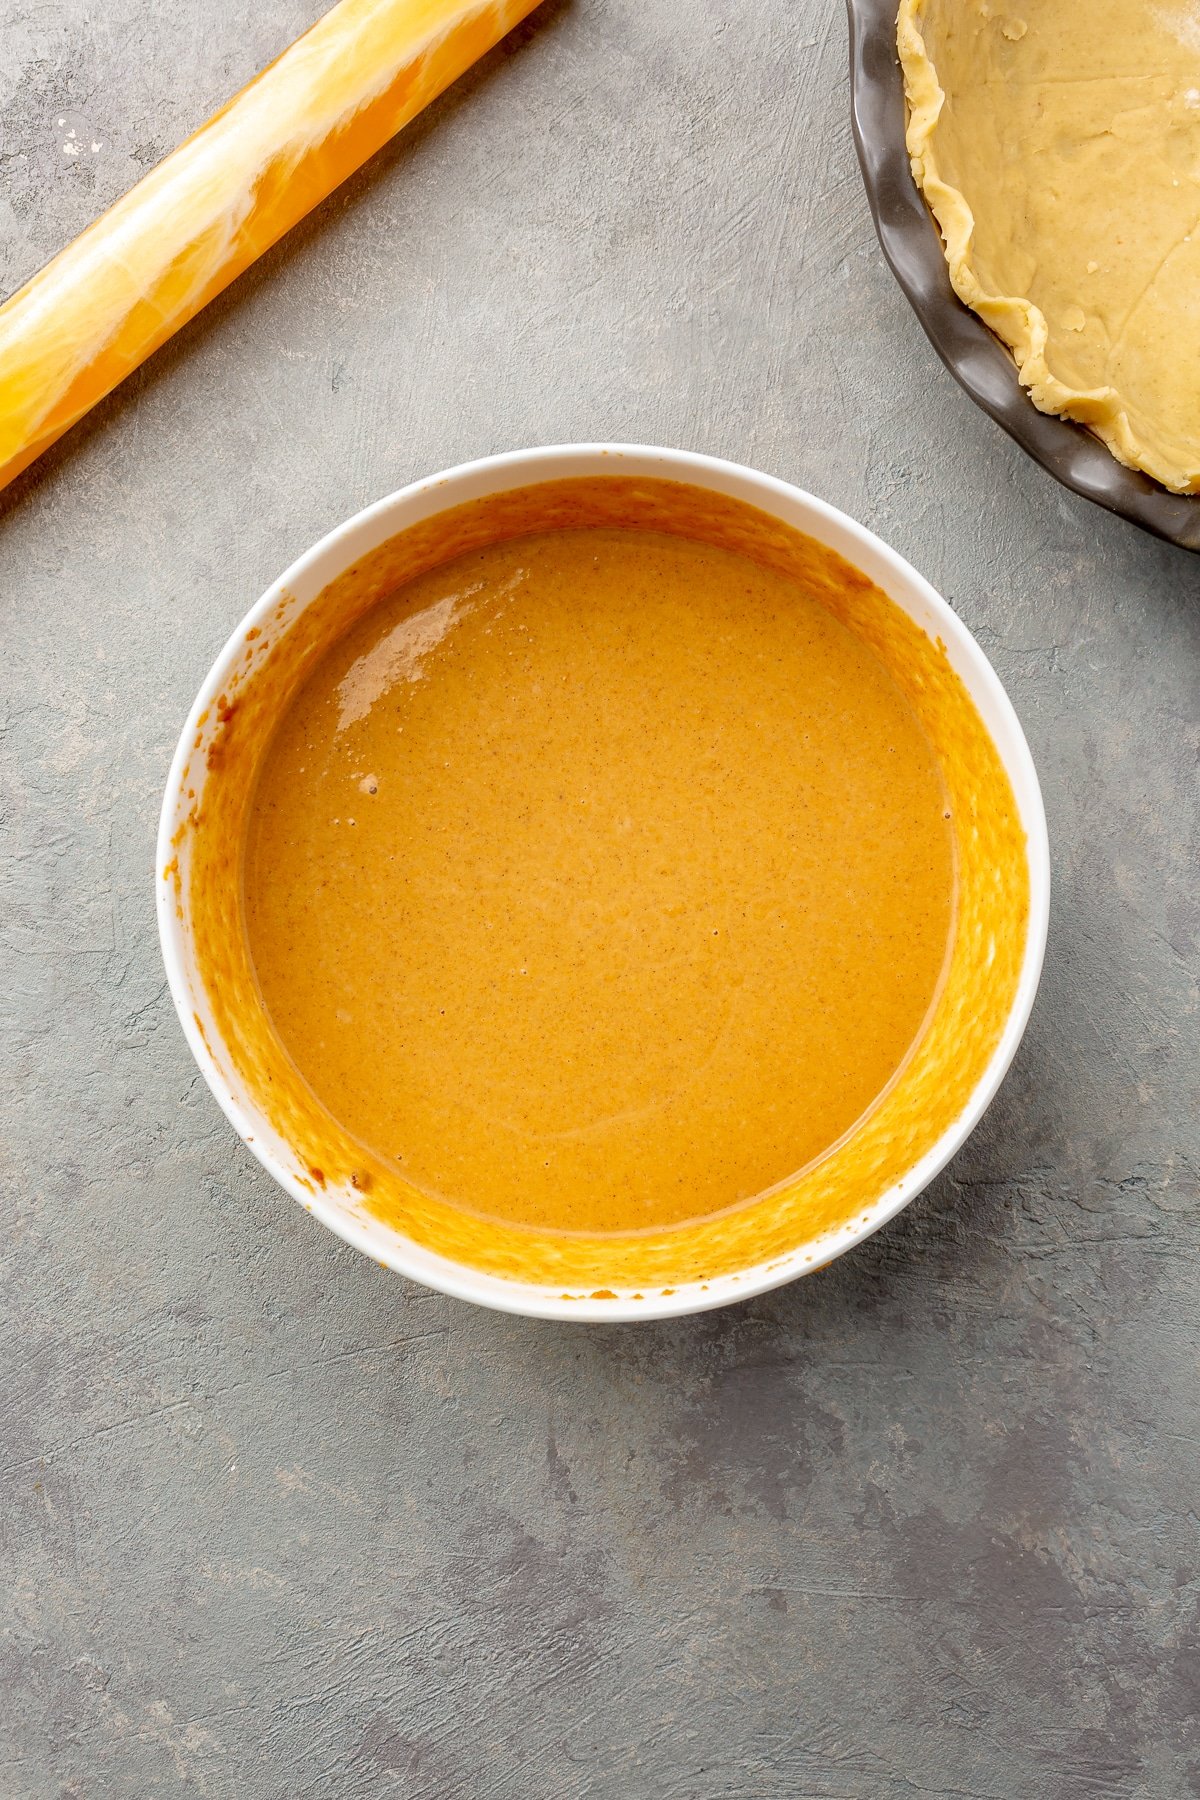 The pumpkin mixture and cream have been fully combined to create a light orange mixture.